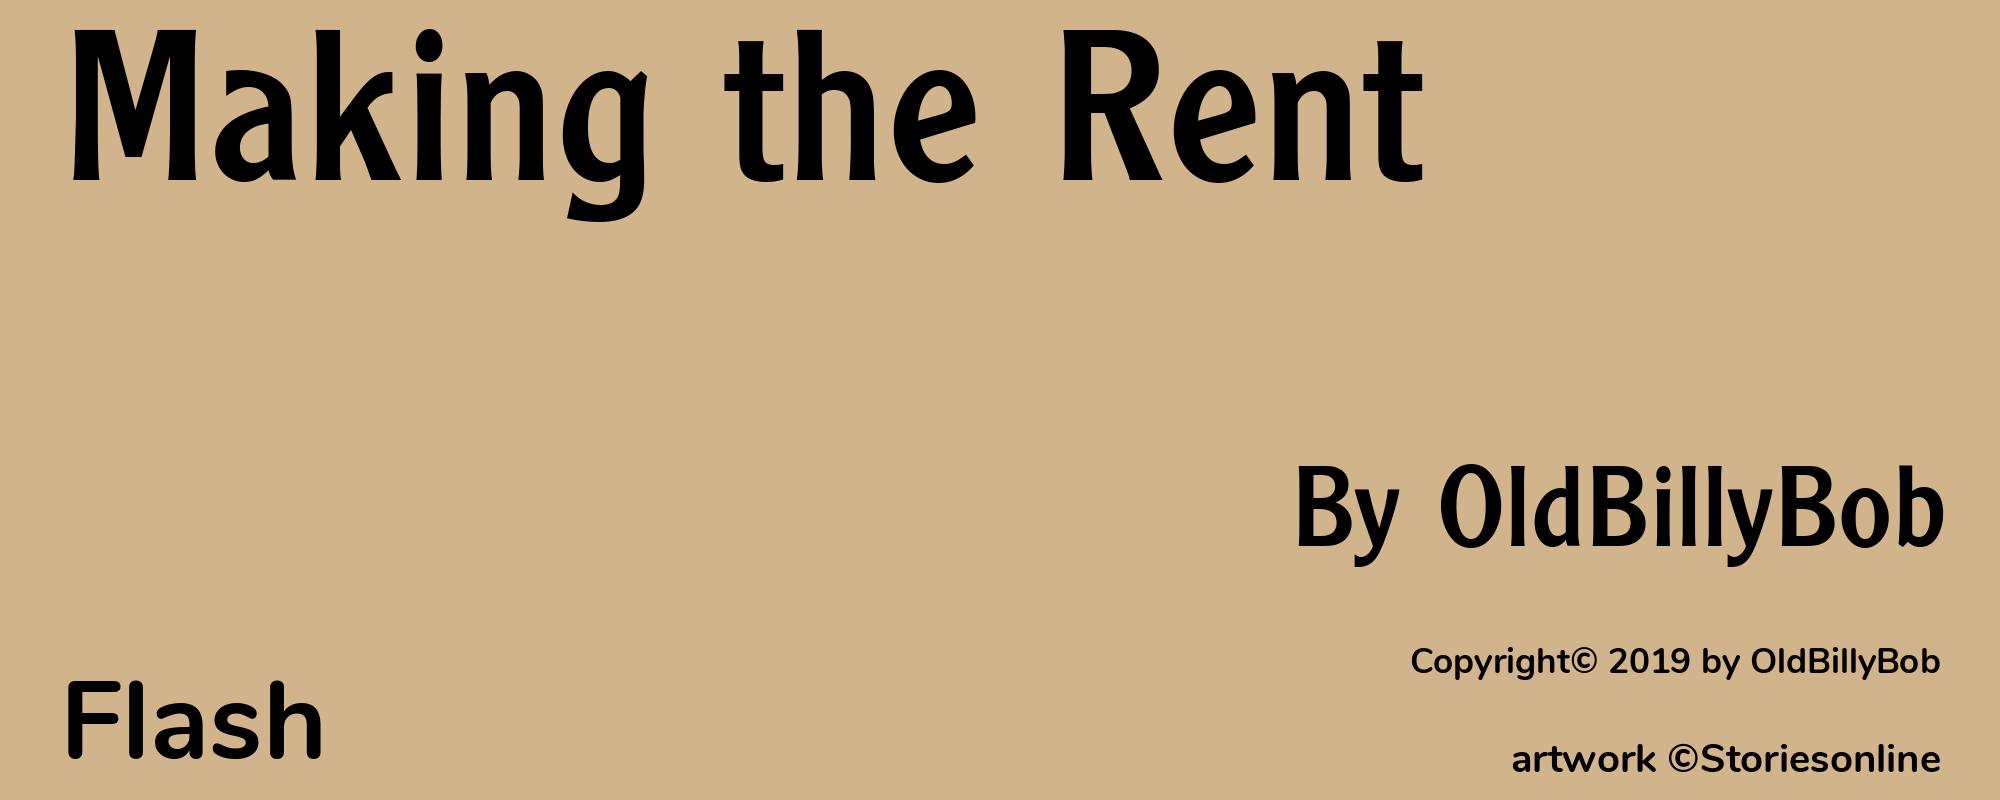 Making the Rent - Cover